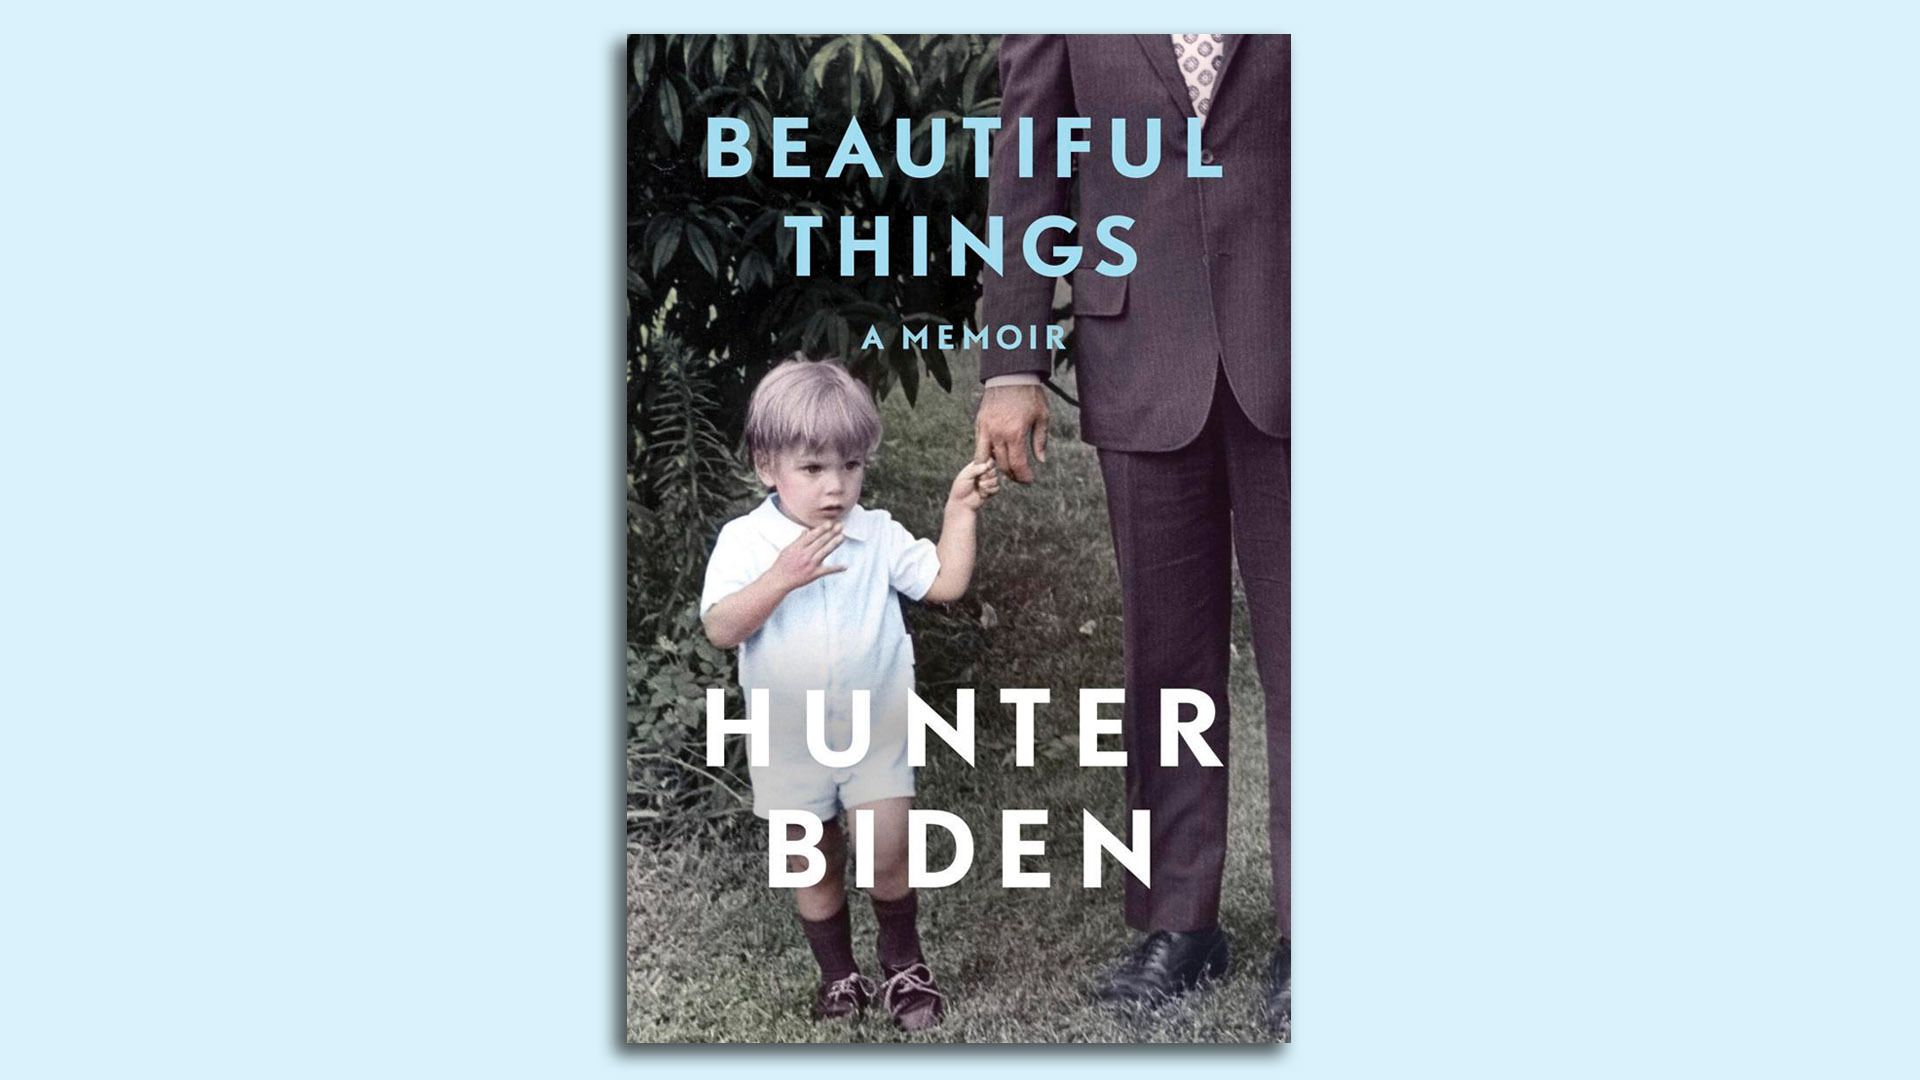 The cover of Hunter Biden's book, "Beautiful things" 